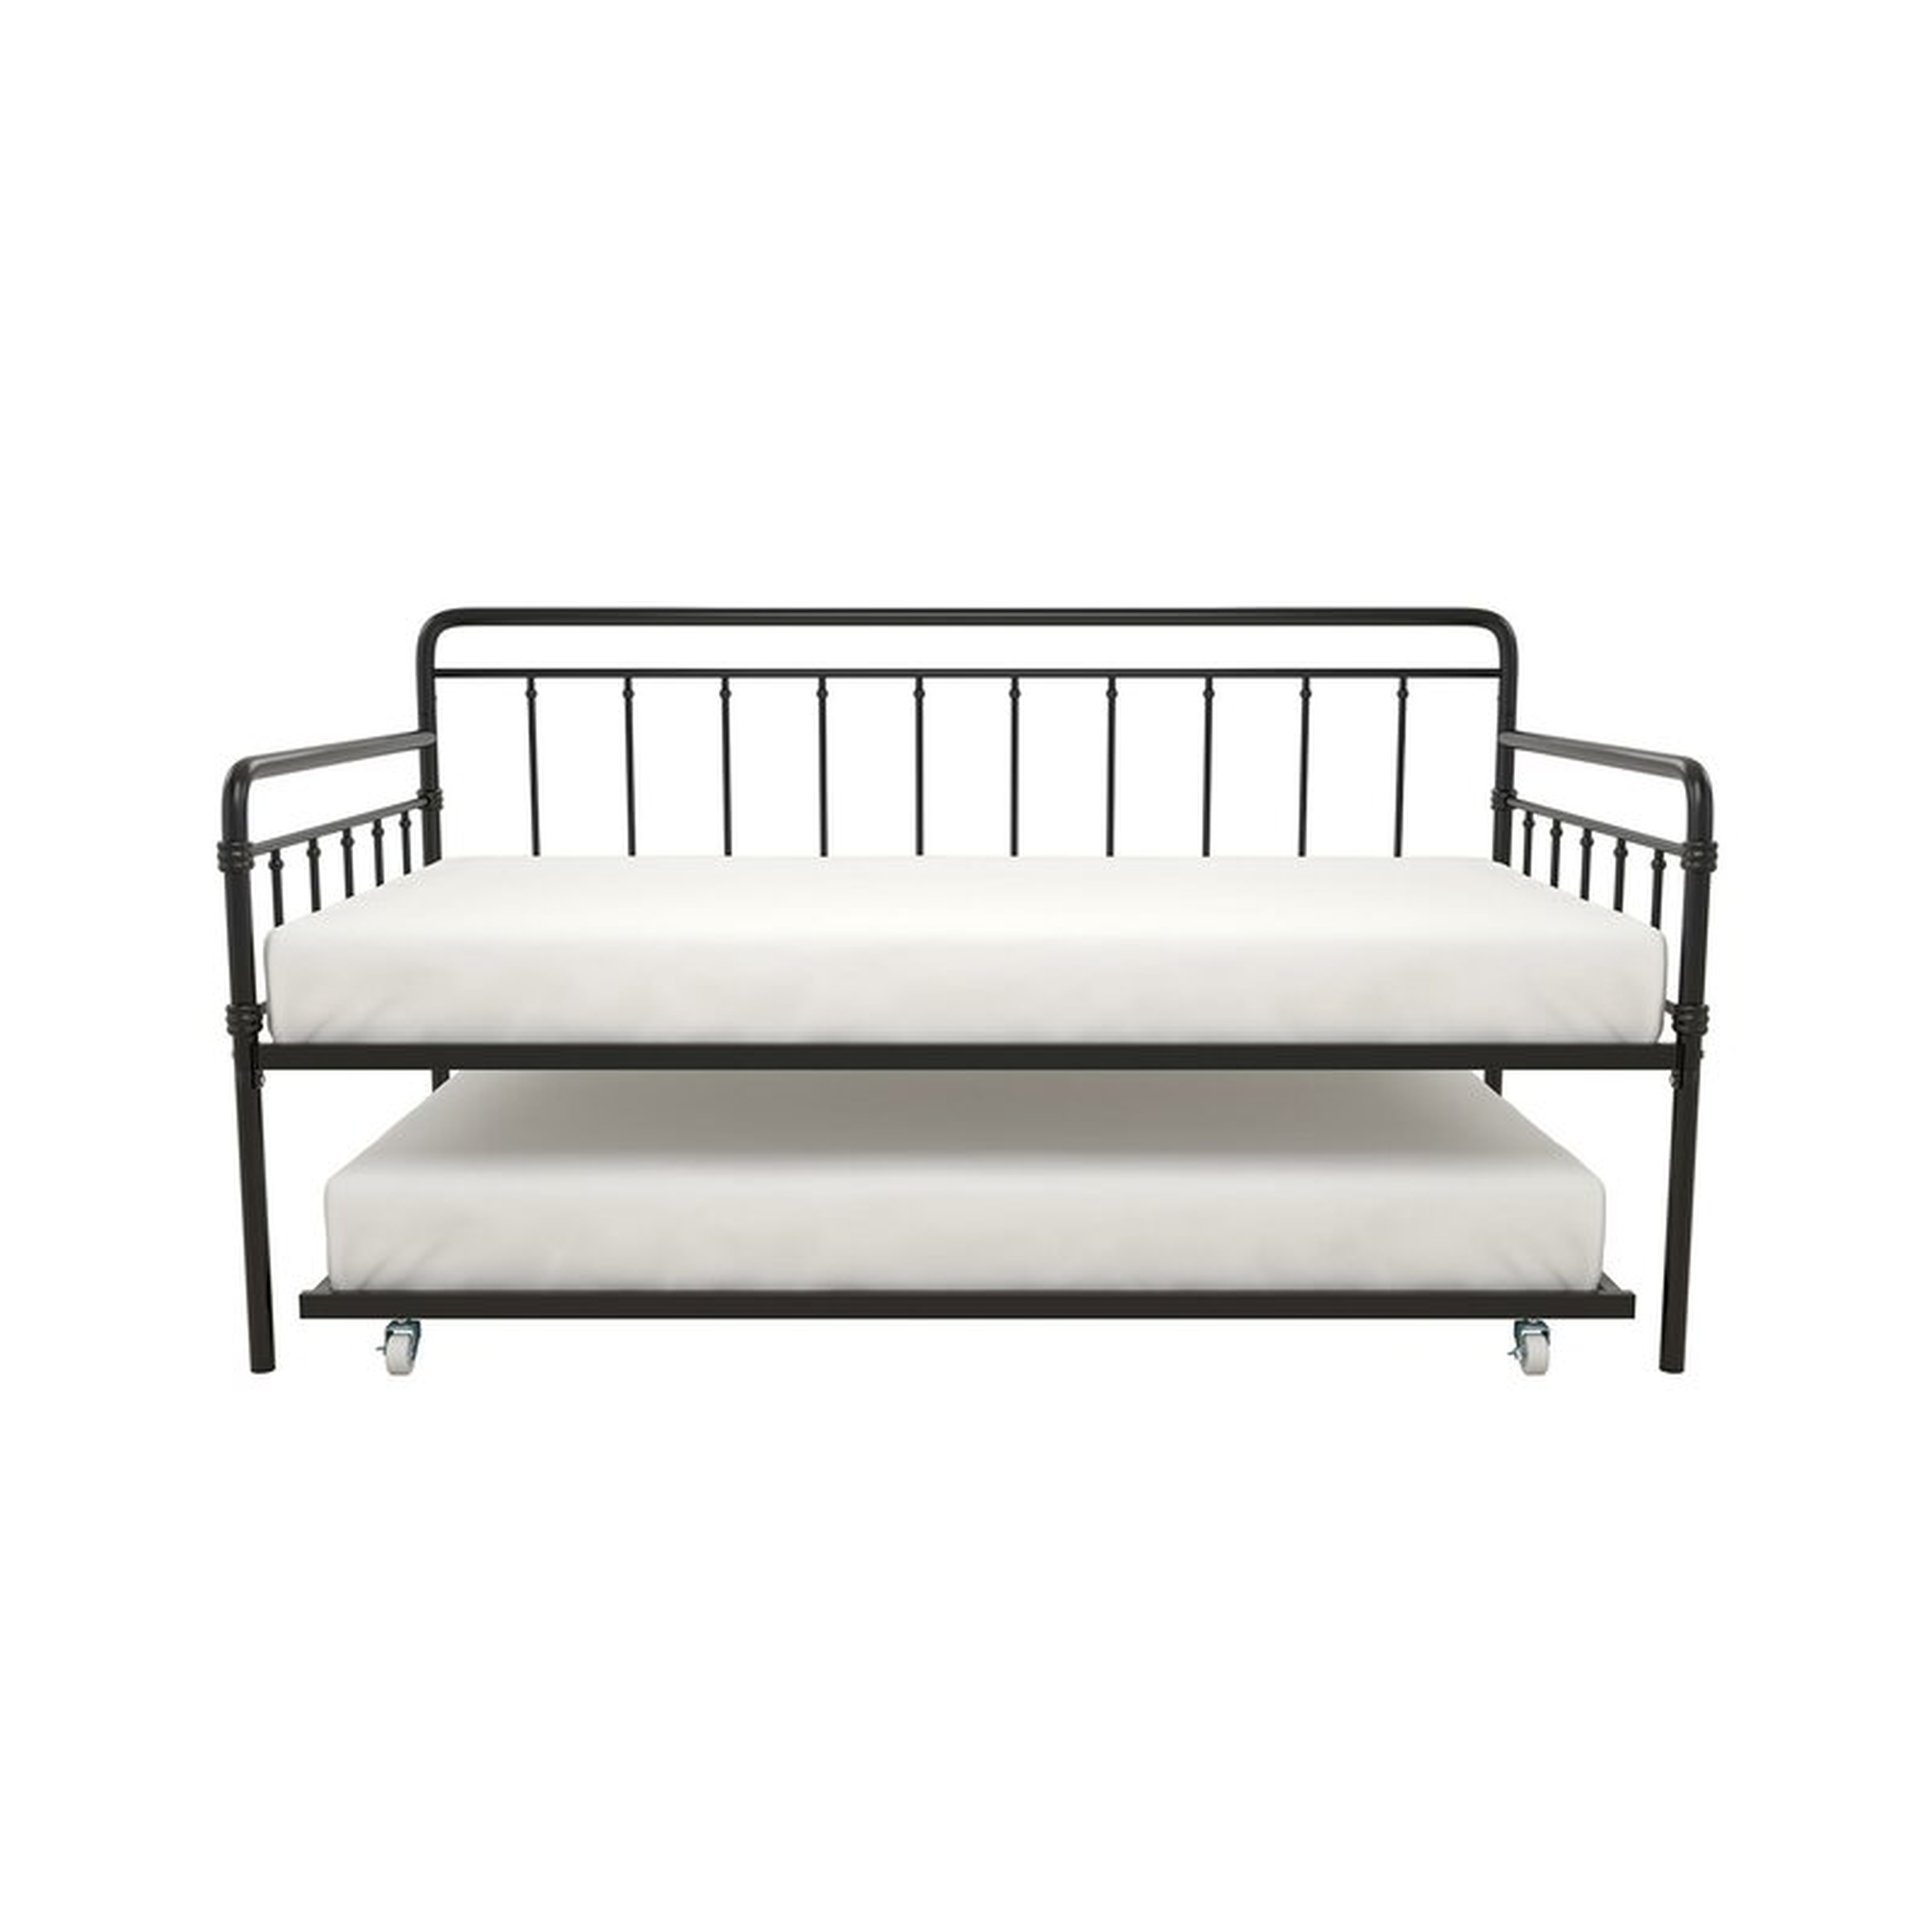 Minehead Daybed With Trundle - Twin, Black - Wayfair